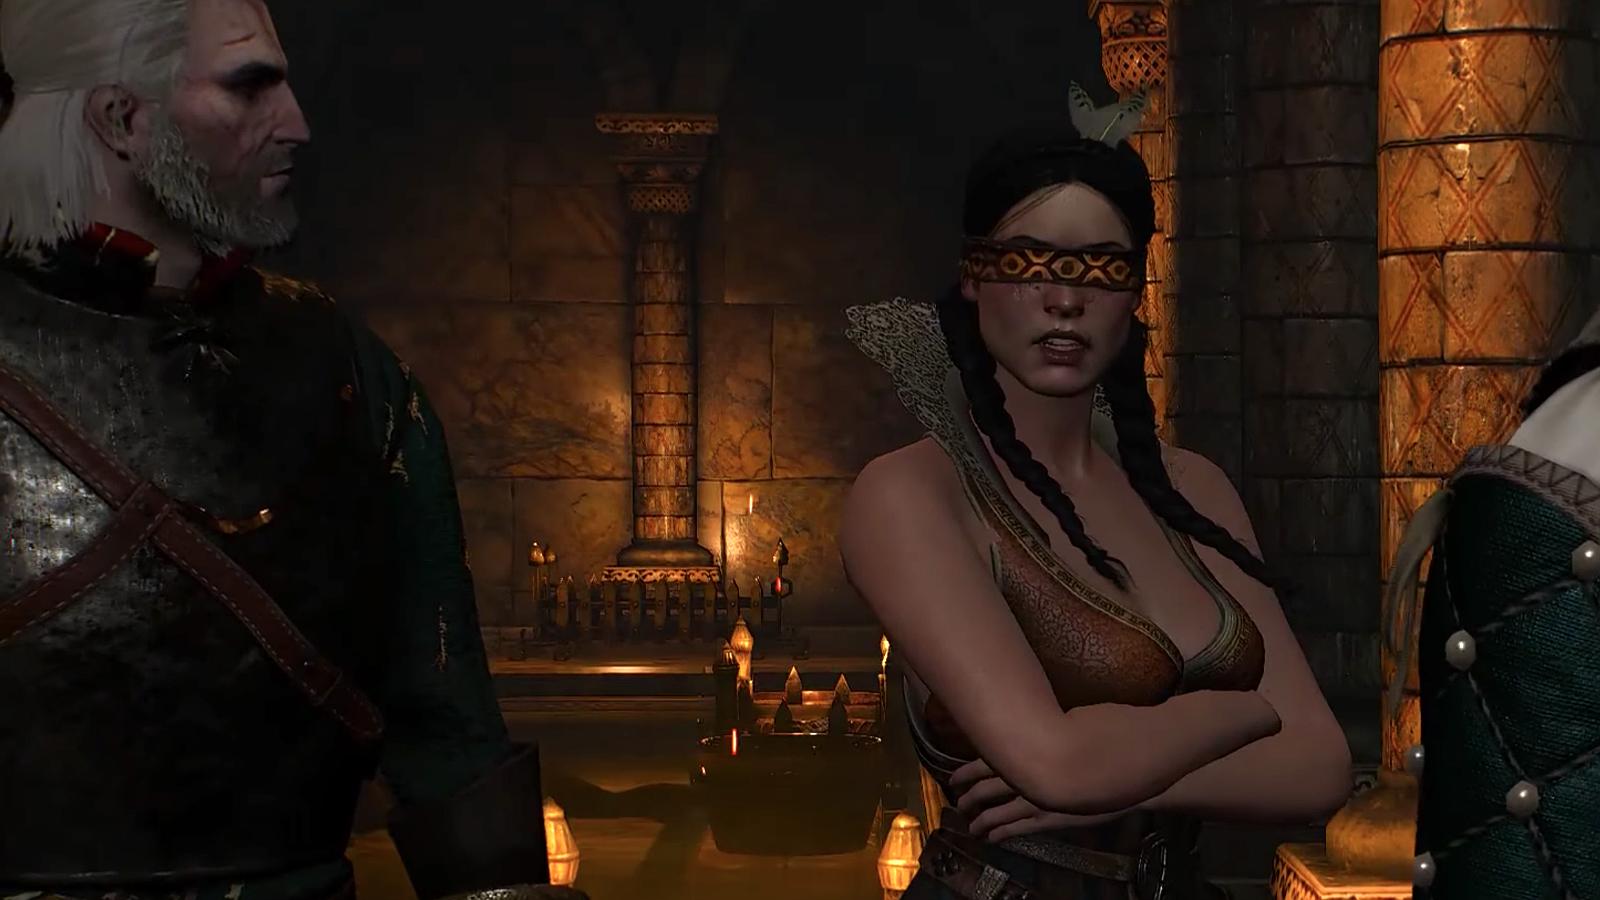 Philippa Eilhart in The Witcher 3 with Geralt